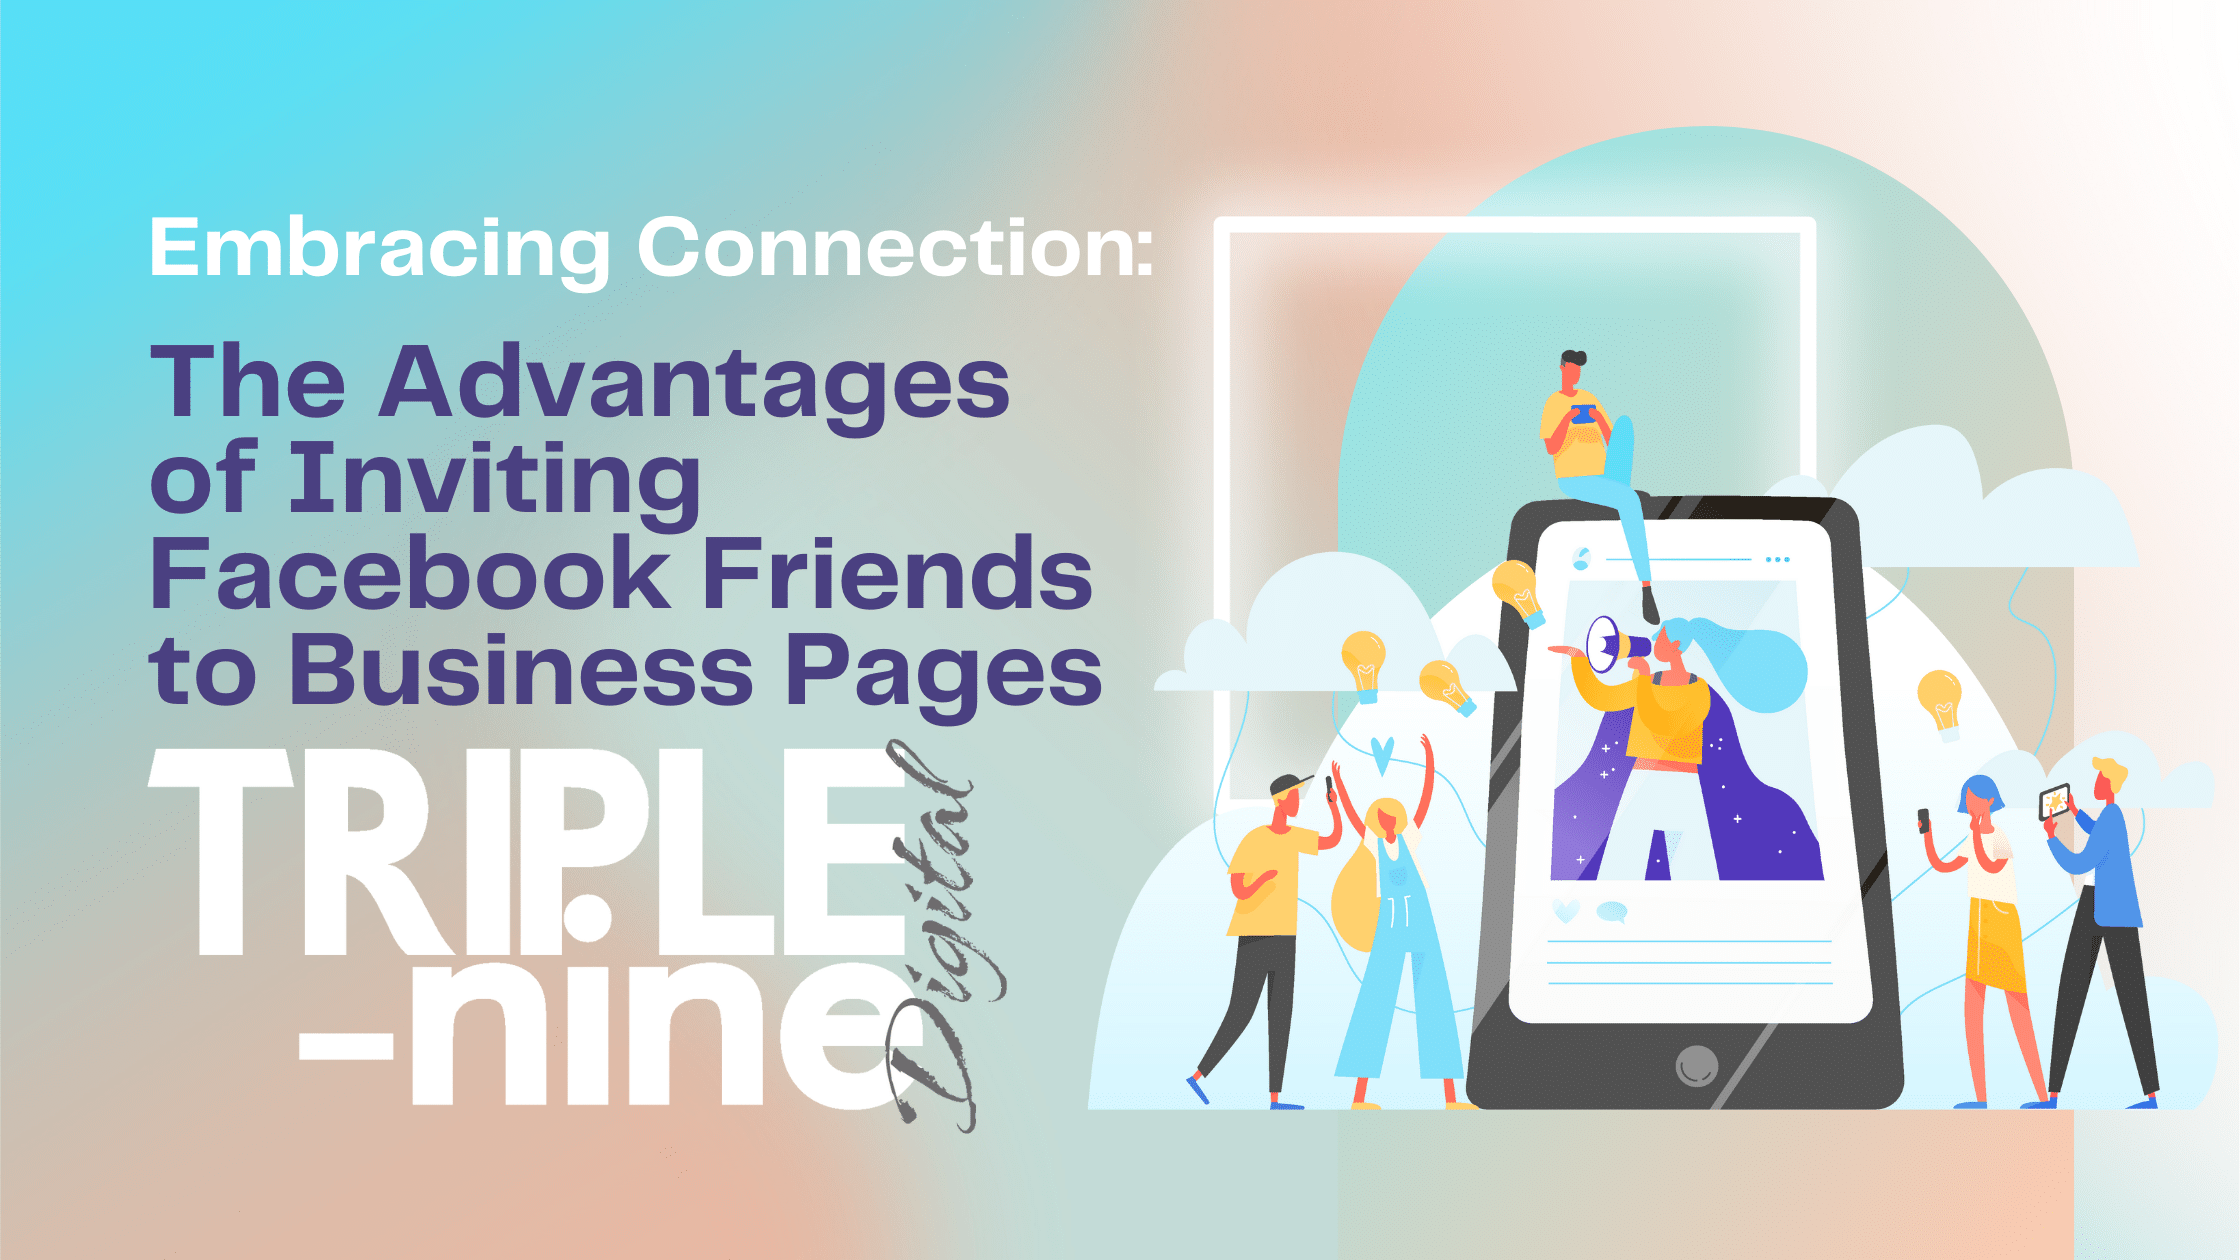 Embracing Connection: The Advantages of Inviting Facebook Friends to Business Pages